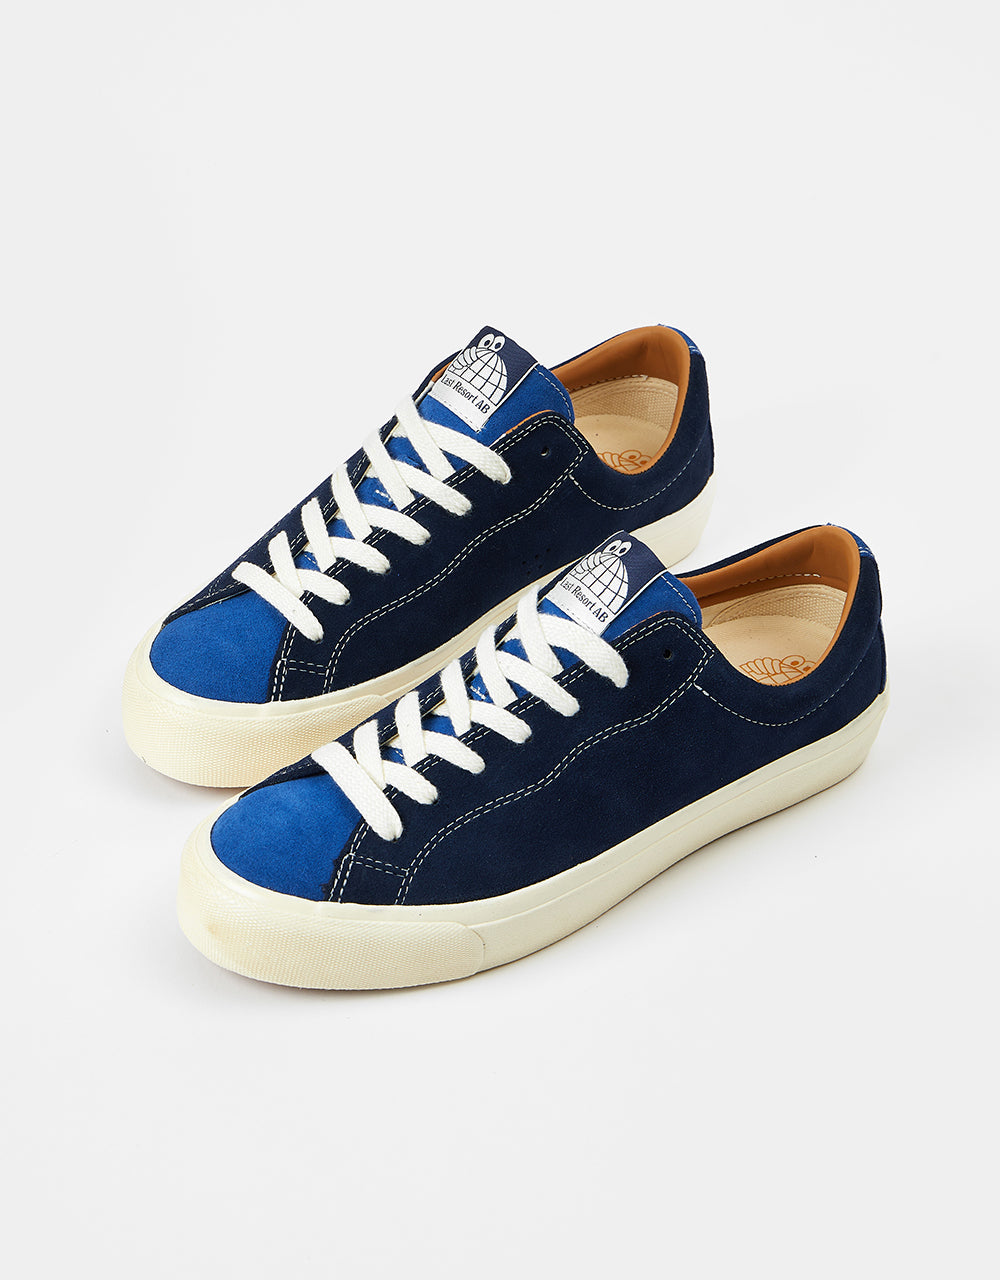 Last Resort AB VM003 Suede Lo Skate Shoes - Duo Blue/White